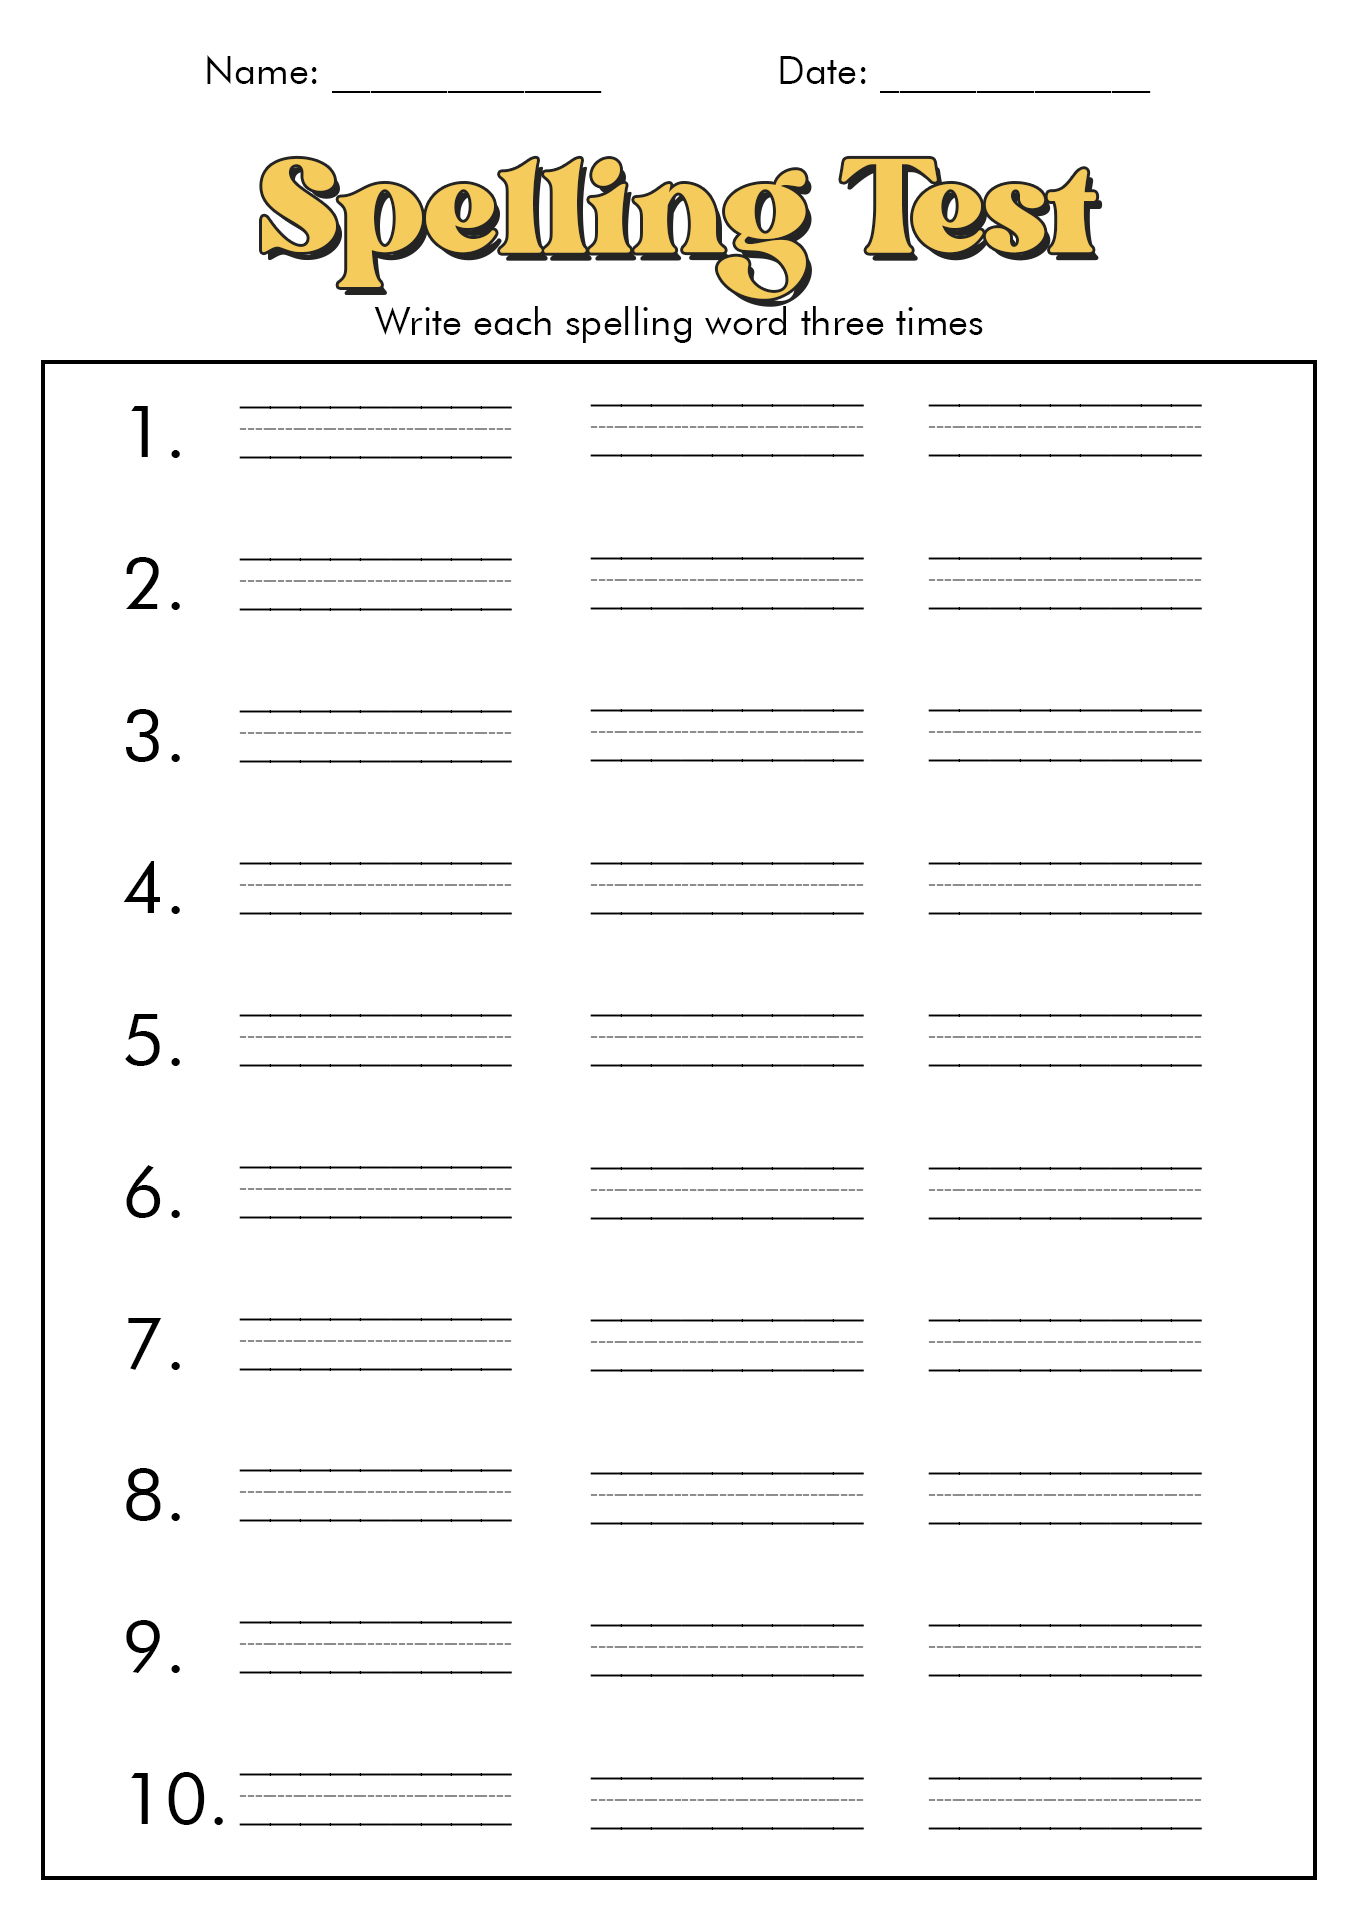 Word Spelling Test Printable Laxenchallenge HotPicture